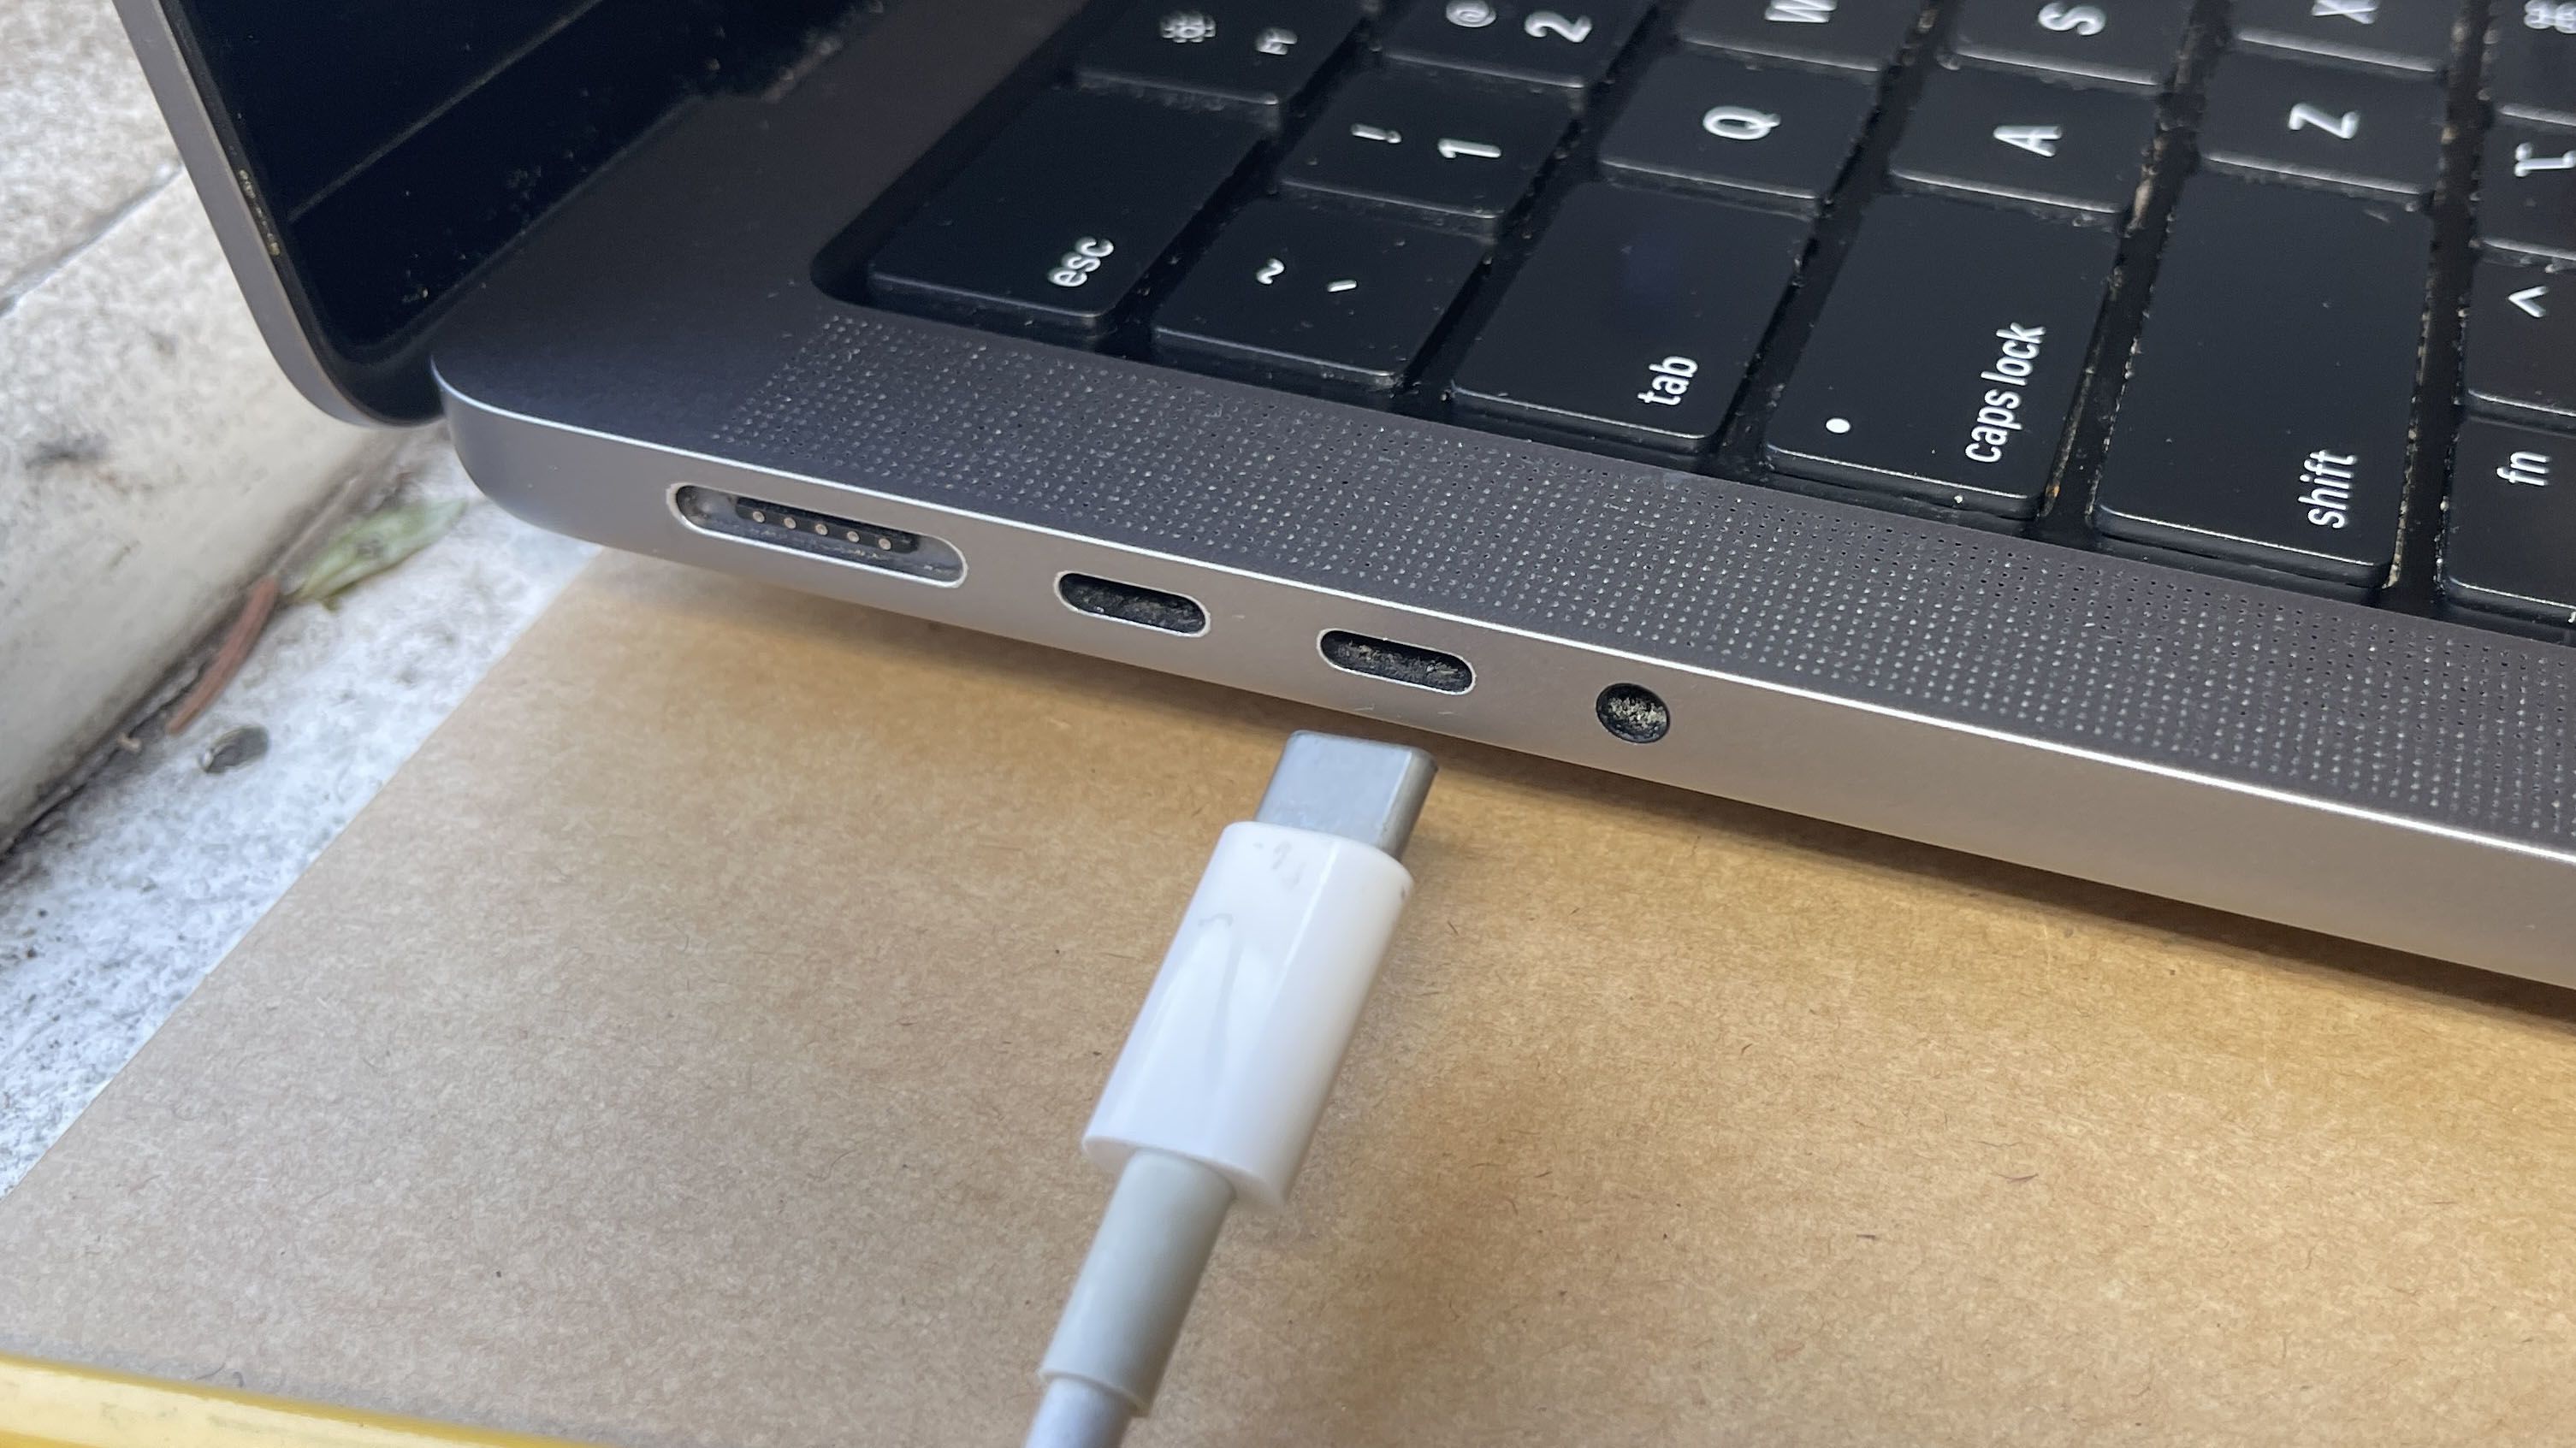 USB-C will be mandatory for all smart devices sold in India